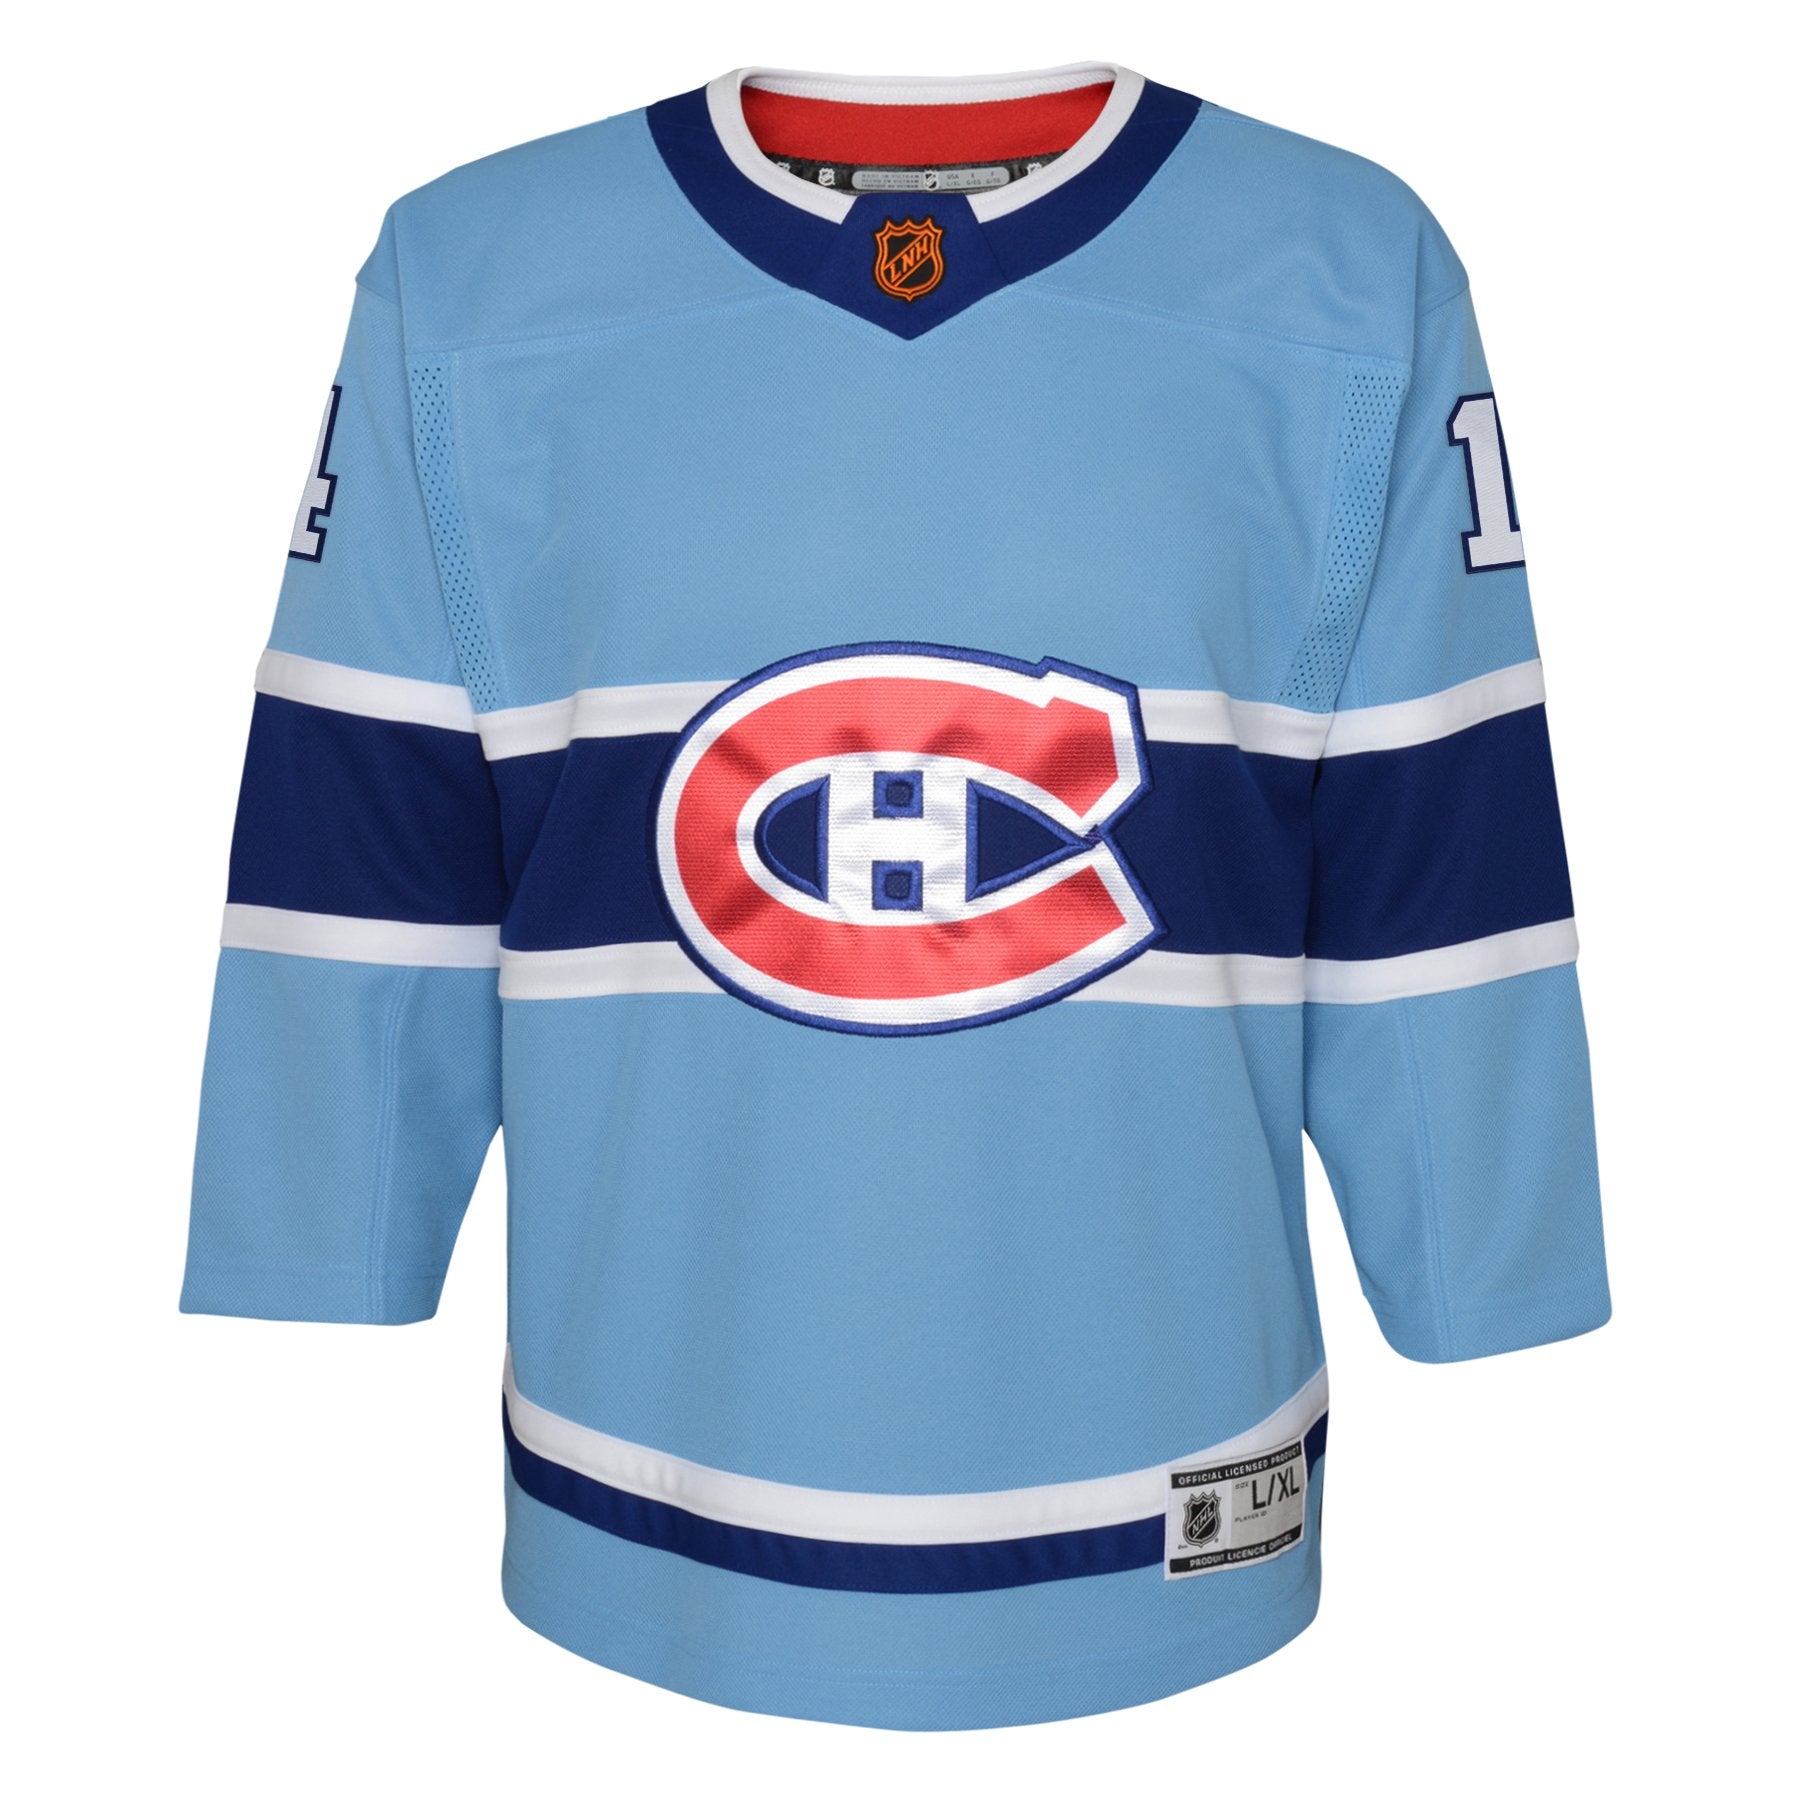 Montreal Canadiens Official Licensed NHL Jerseys —